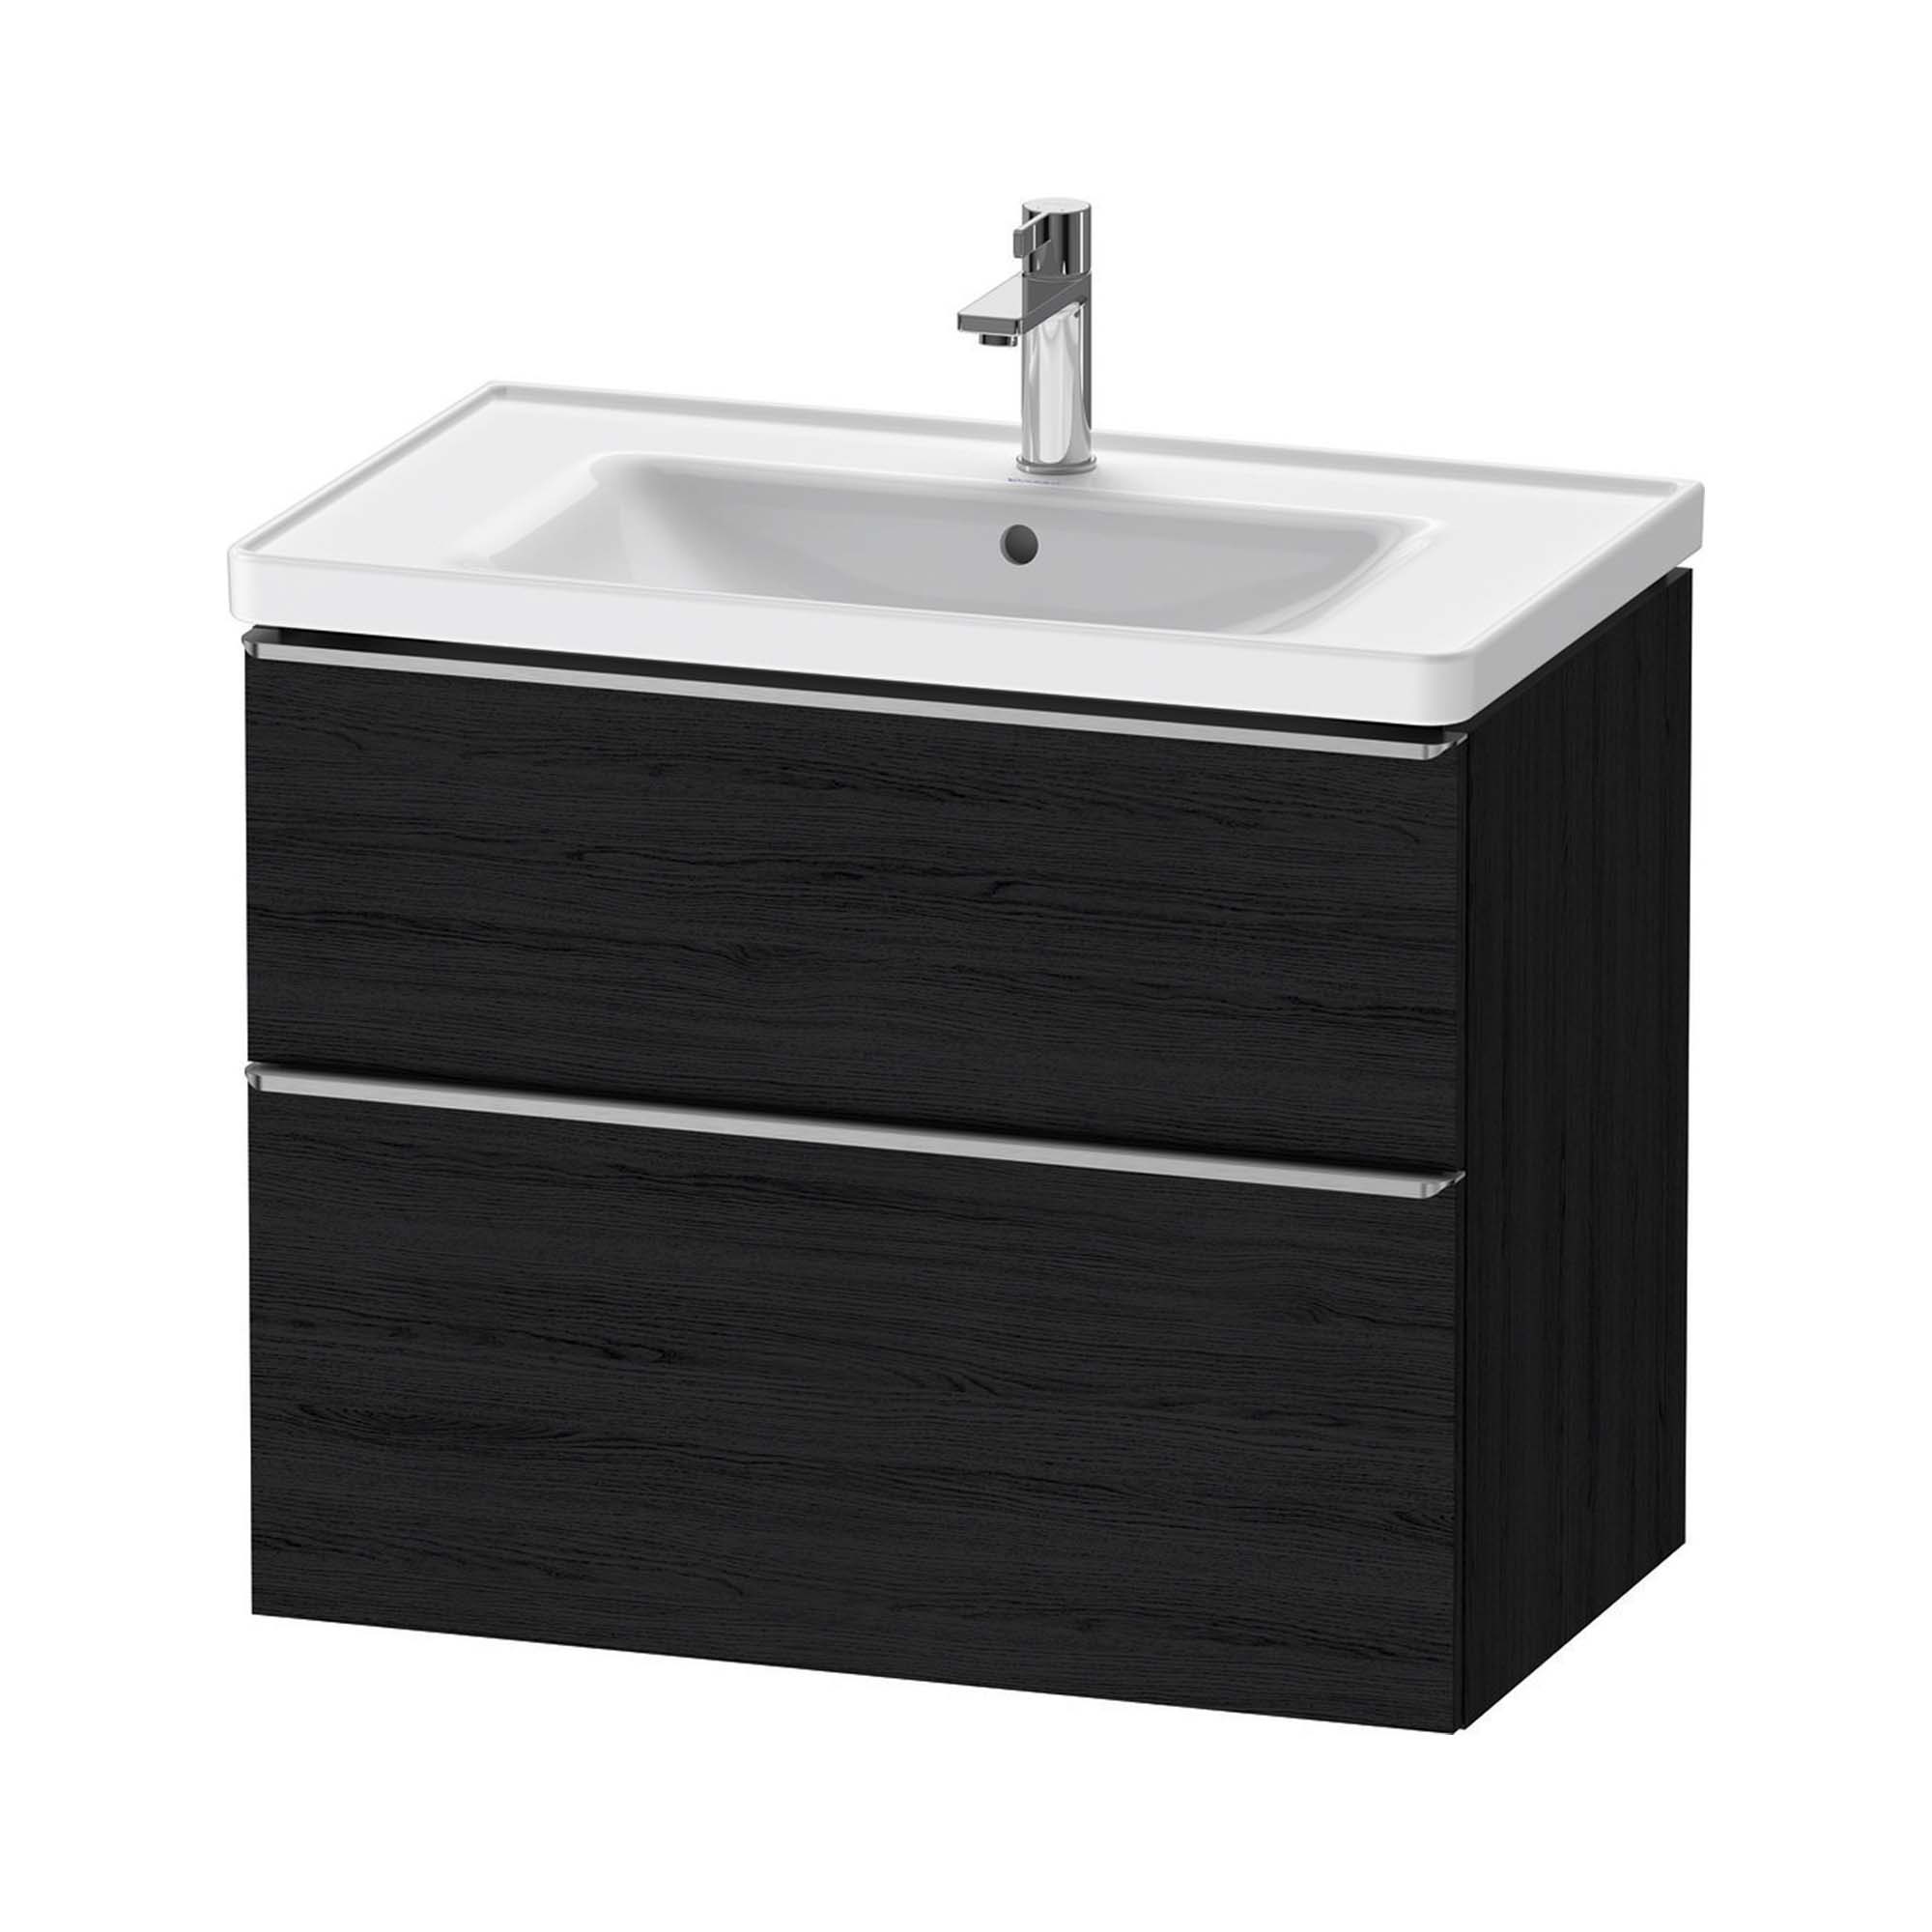 duravit d-neo 800mm wall mounted vanity unit with d-neo basin black oak stainless steel handles